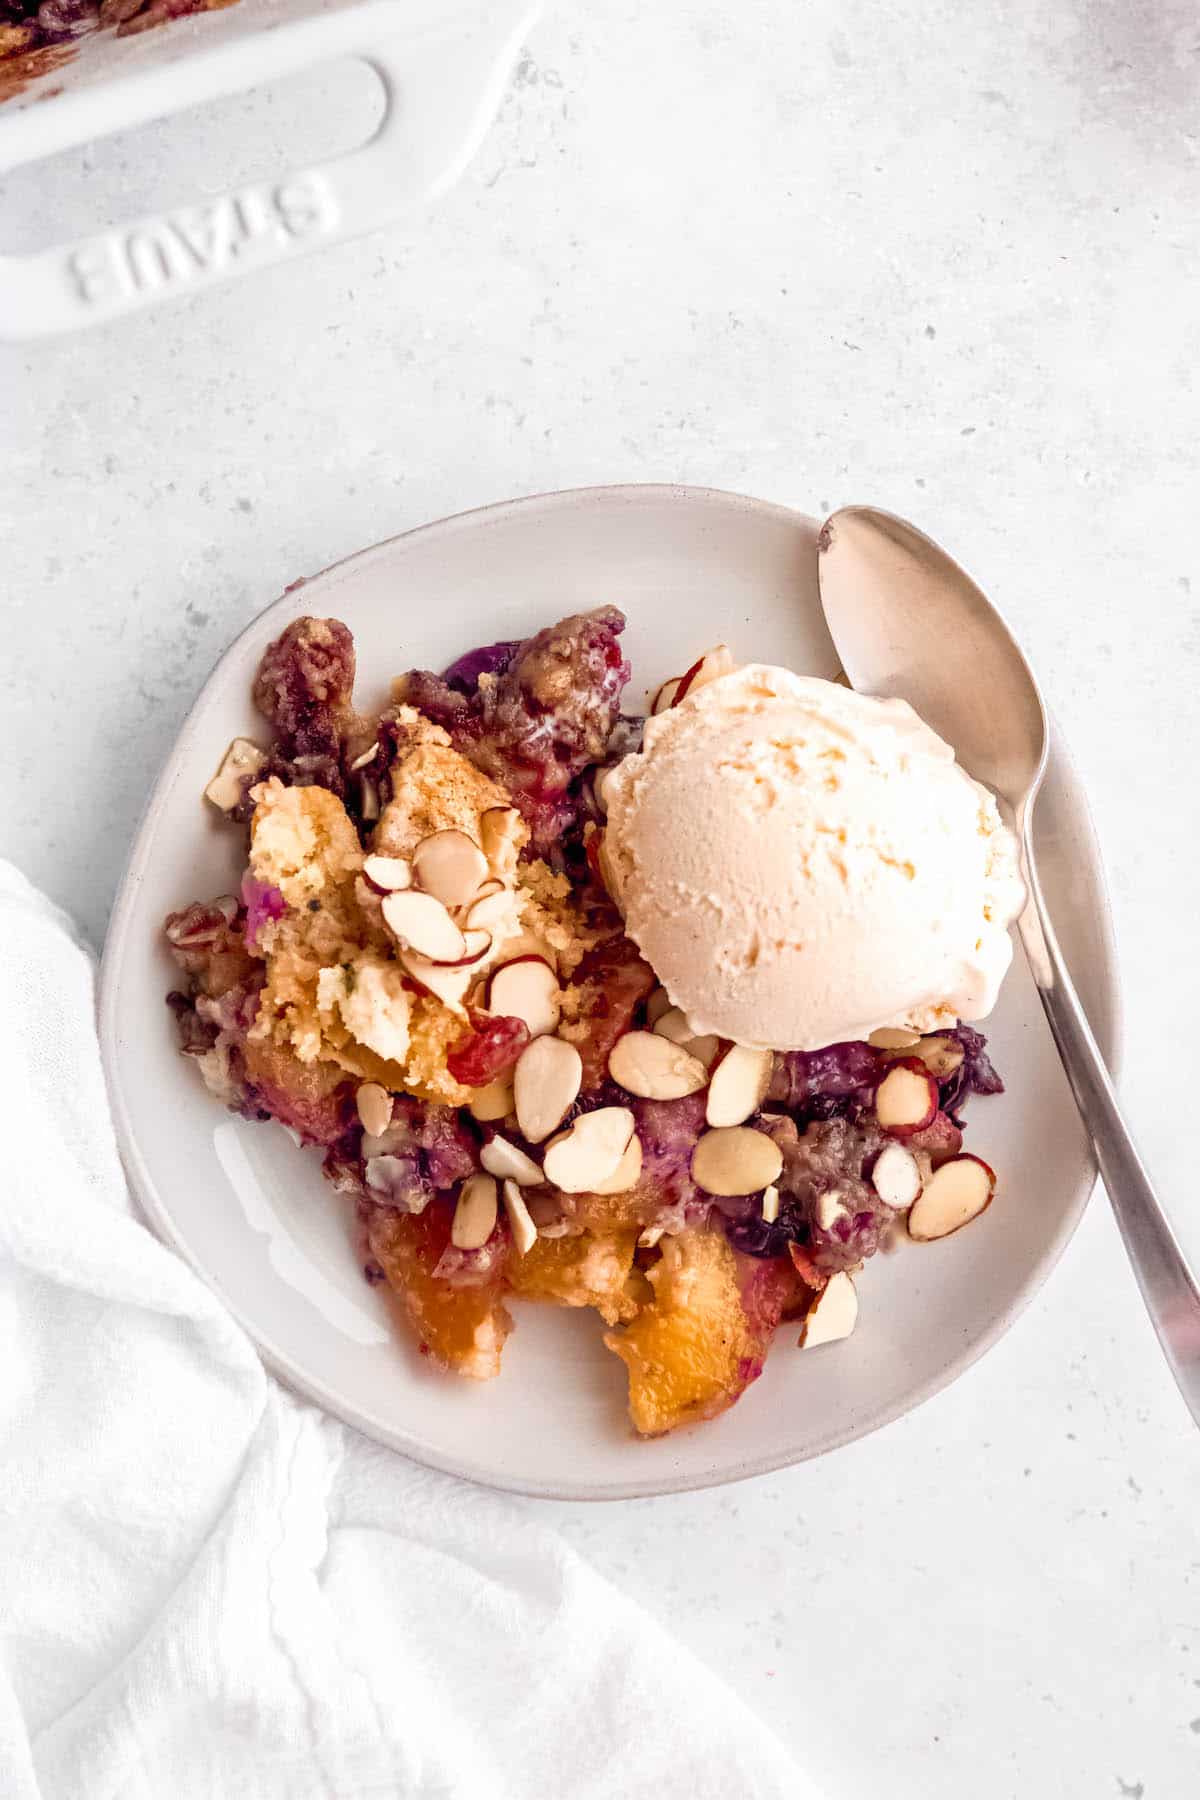 single serving of peach blueberry dump cake on a white dessert plate with a scoop of ice cream and a silver spoon.